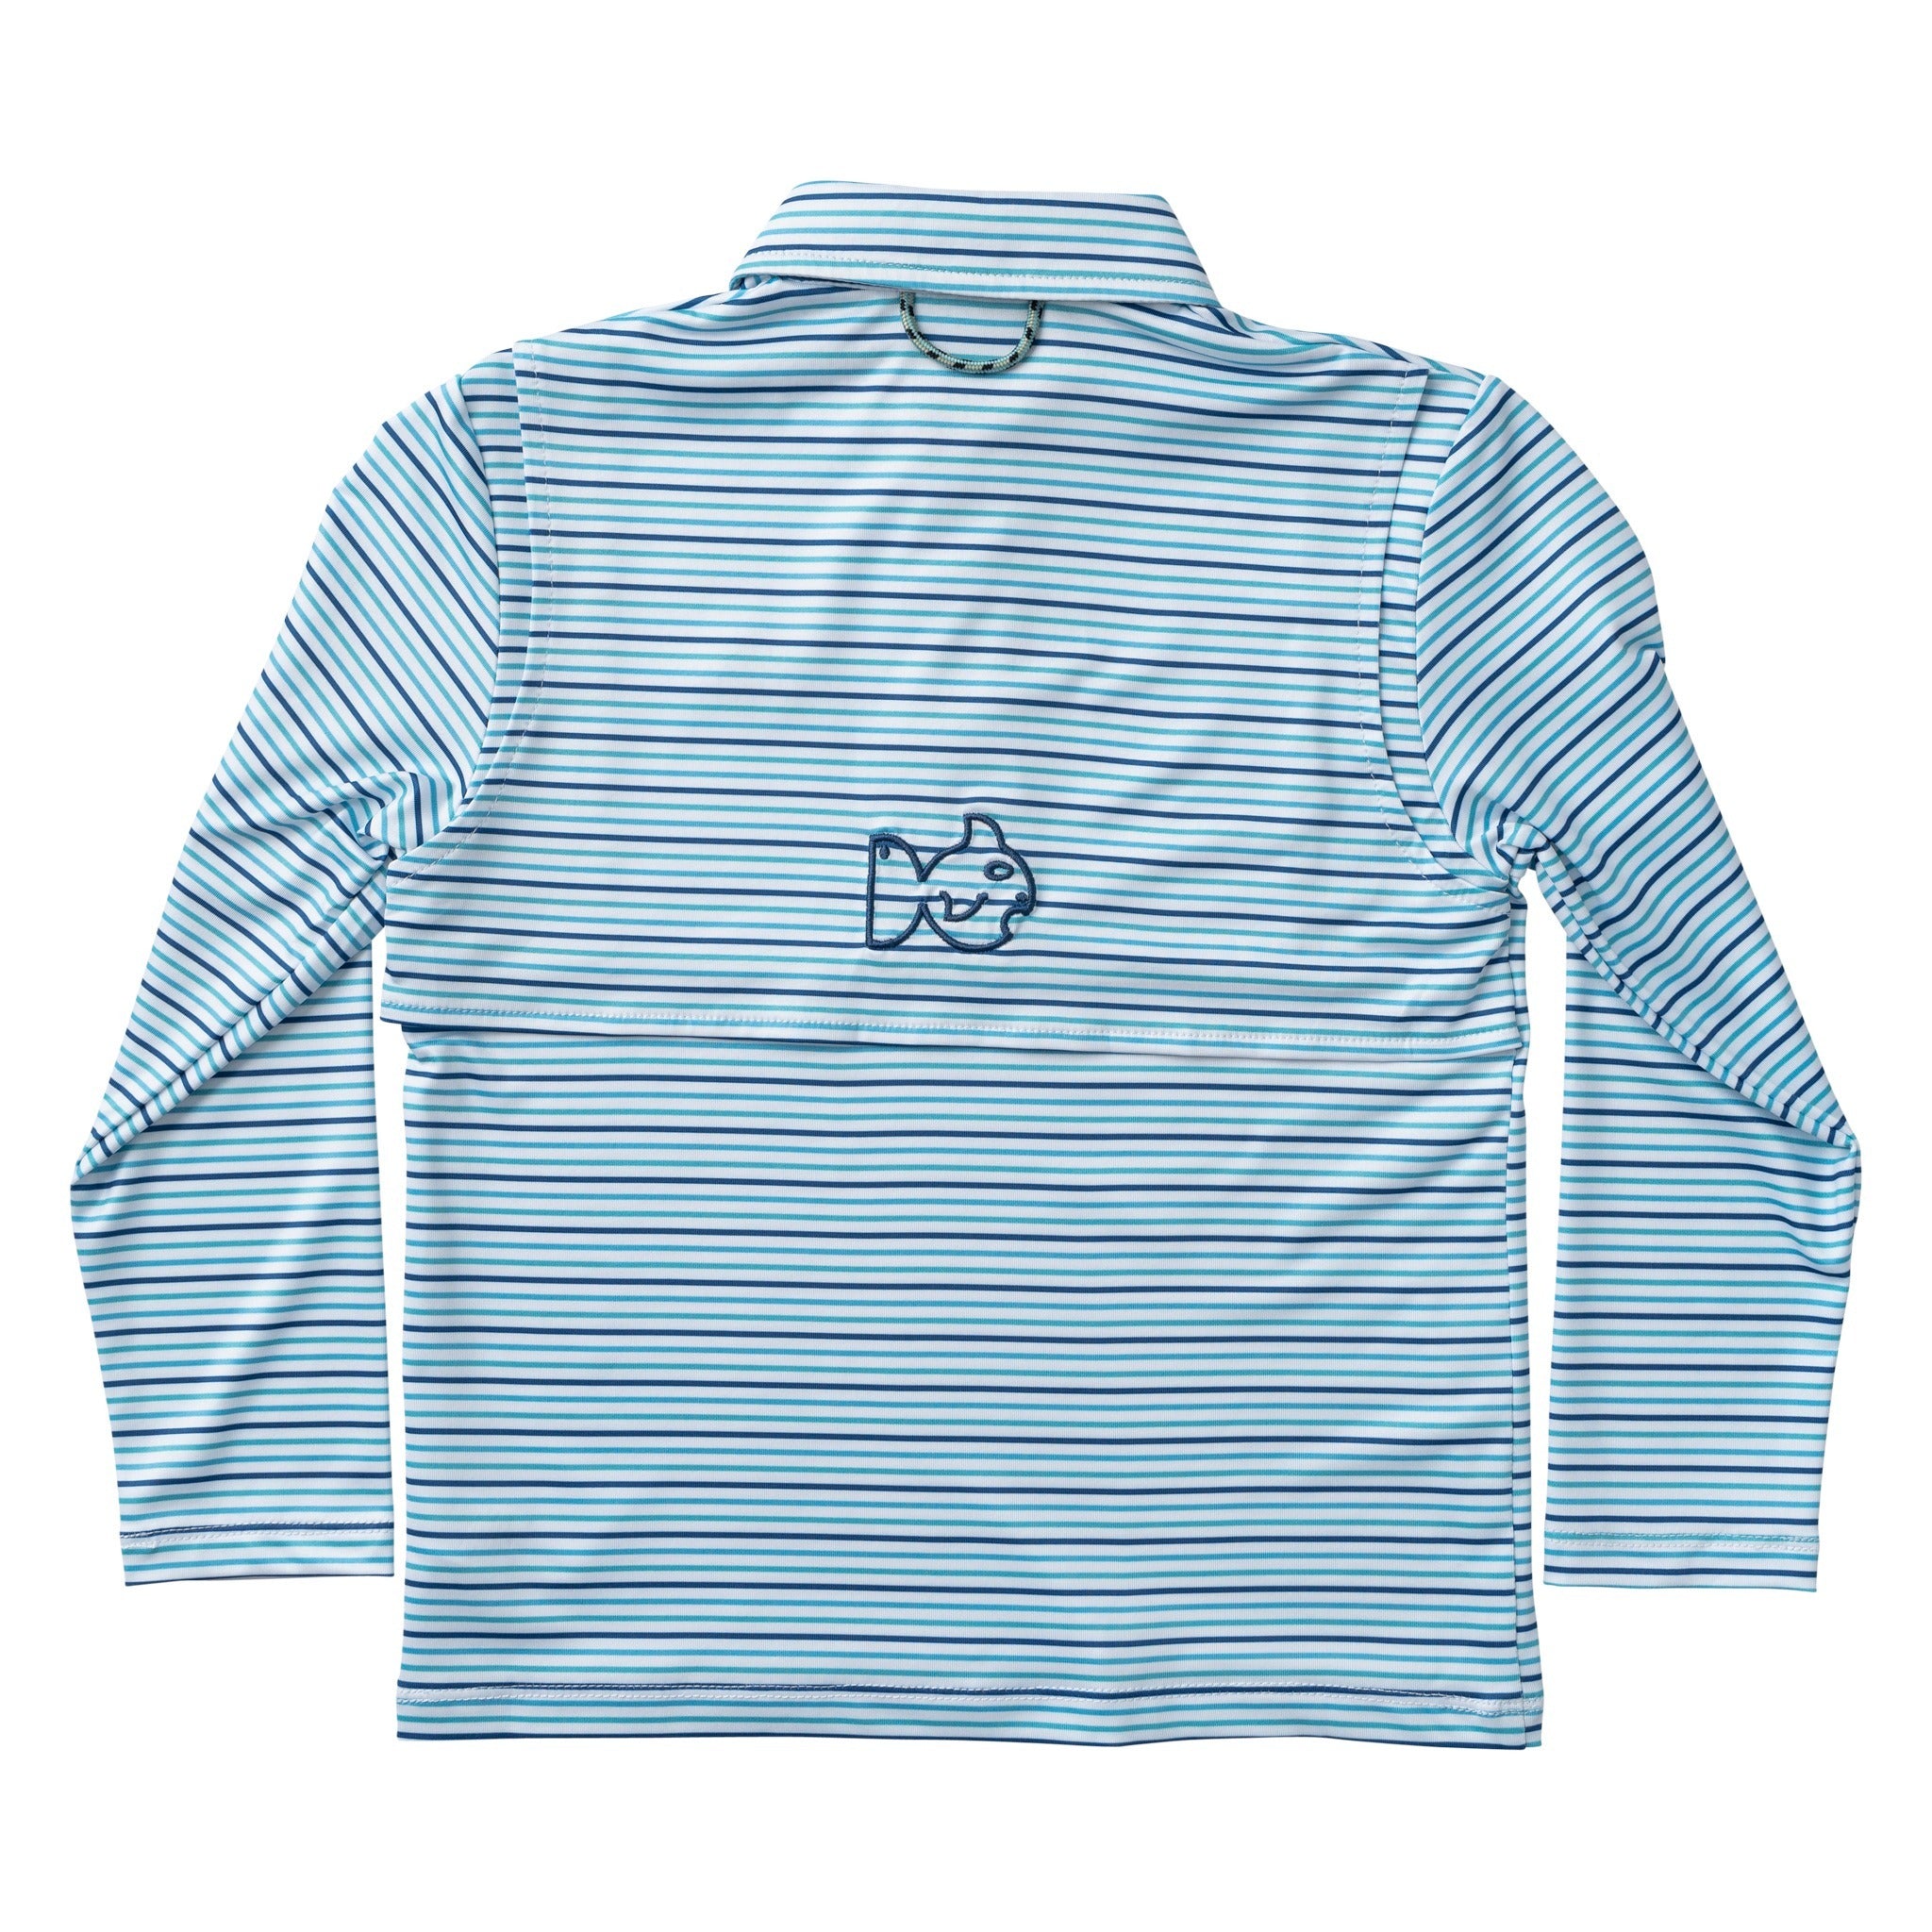 Pro Performance Polo - Ethereal Blue Stripe (2T-8/10)